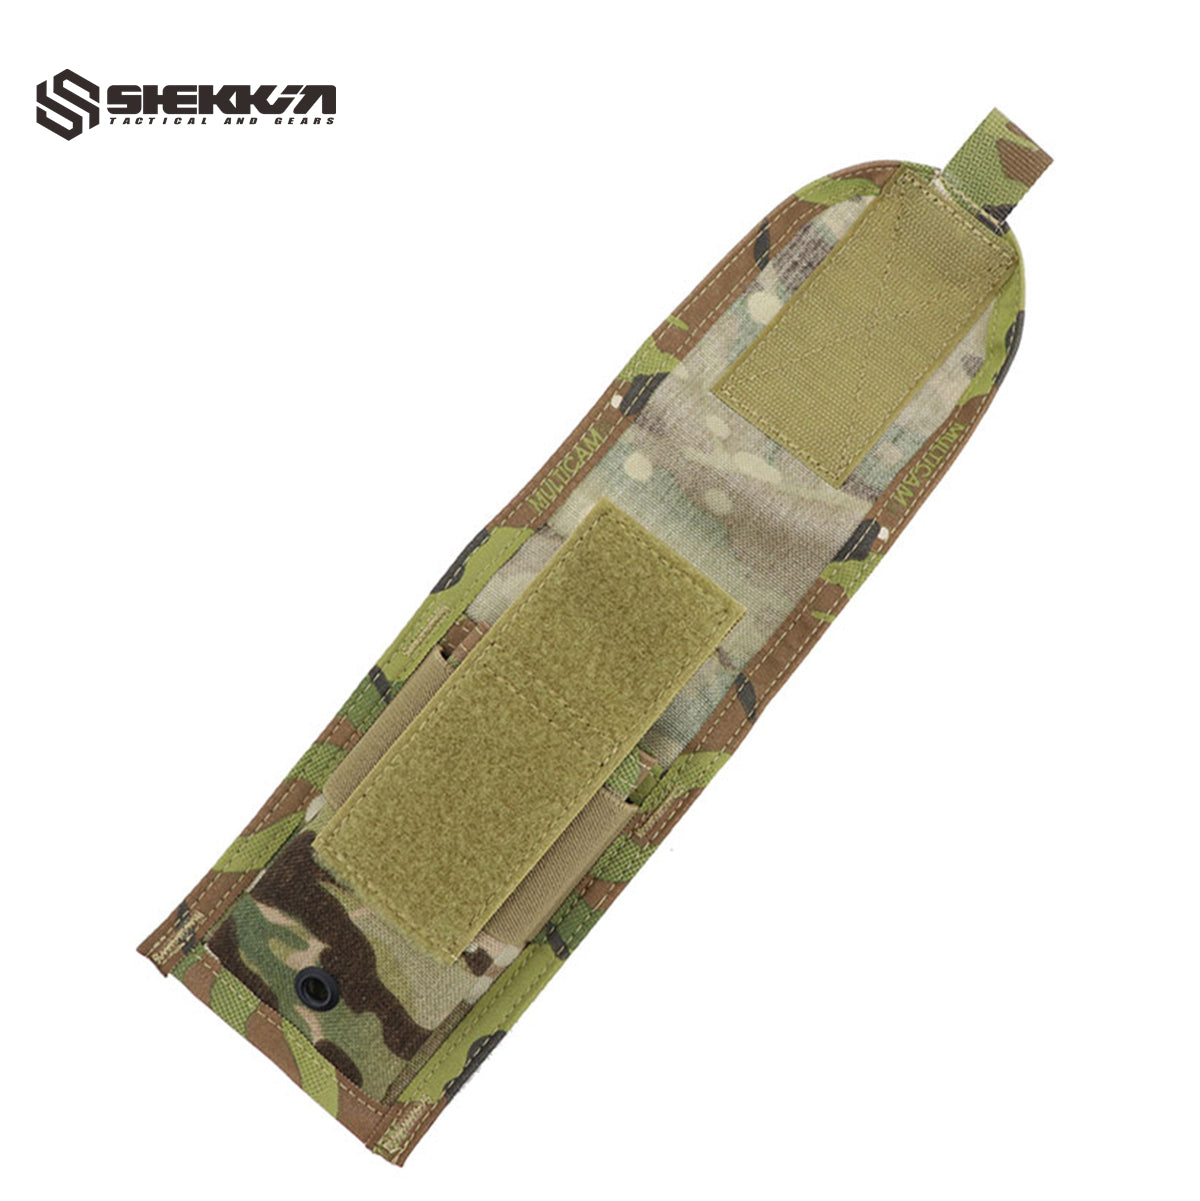 Multicam Paraclete style Tiered M4 Mag Pouch - Shekkin Gears